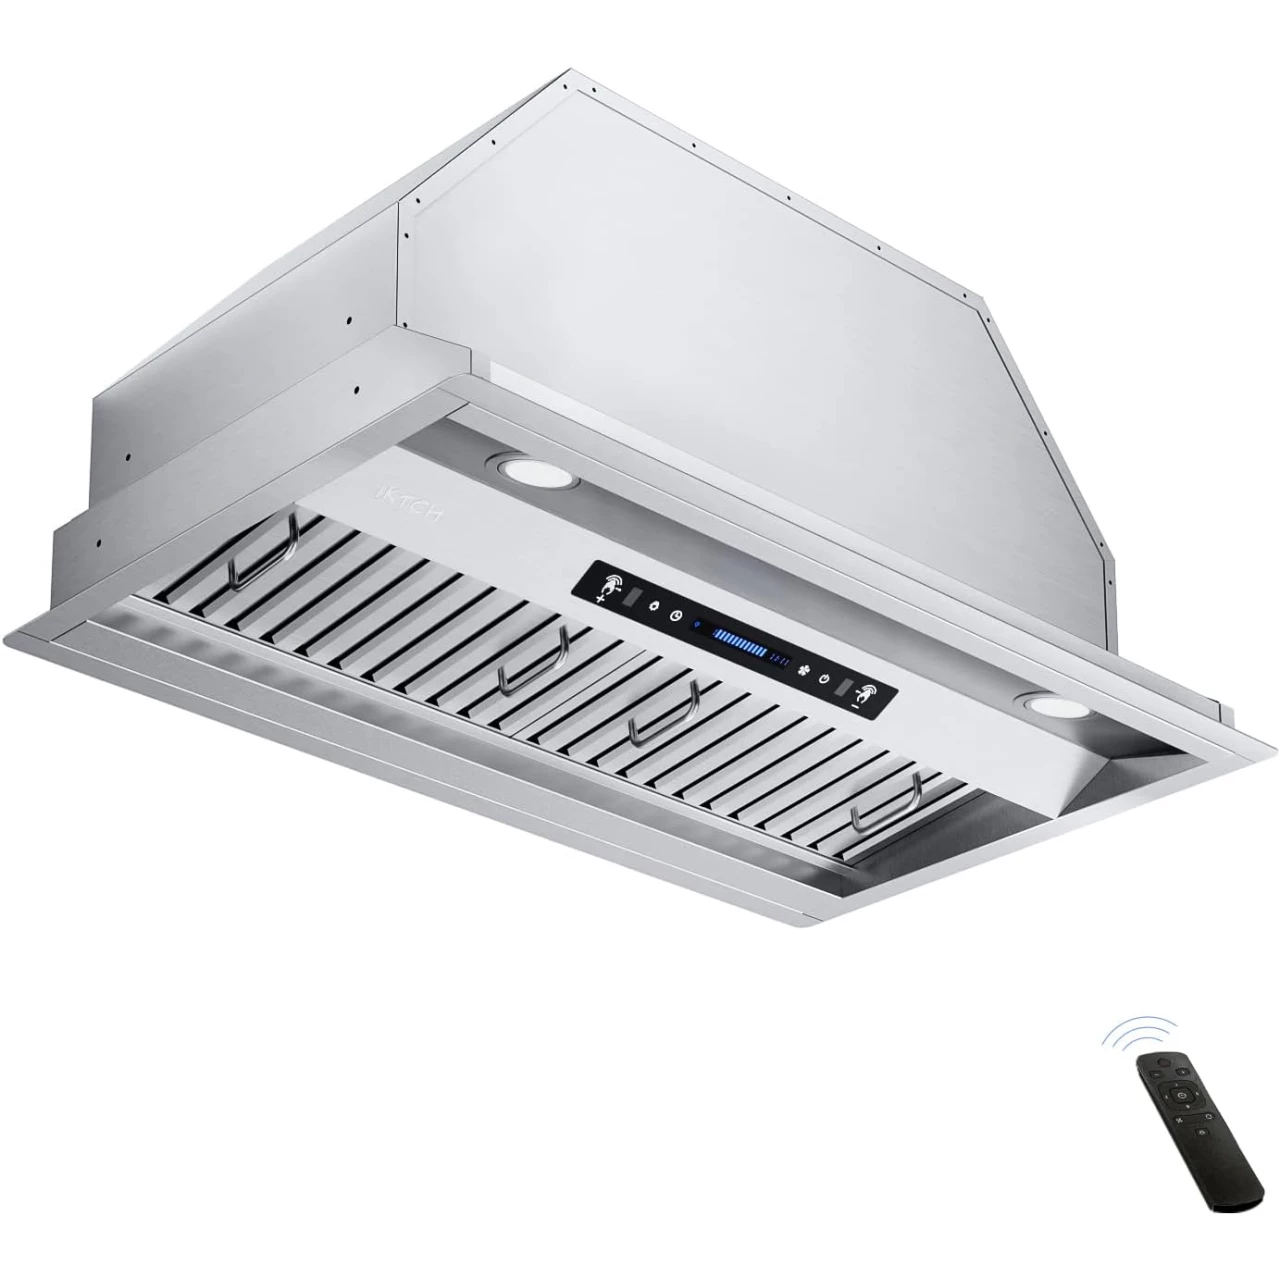 IKTCH 42 inch Built-in/Insert Range Hood 900 CFM, Ducted/Ductless Convertible Duct, Stainless Steel Kitchen Vent Hood with 2 Pcs Adjustable Lights and 3 Pcs Baffle Filters with Handlebar(IKB02-42&rsquo;&rsquo;)